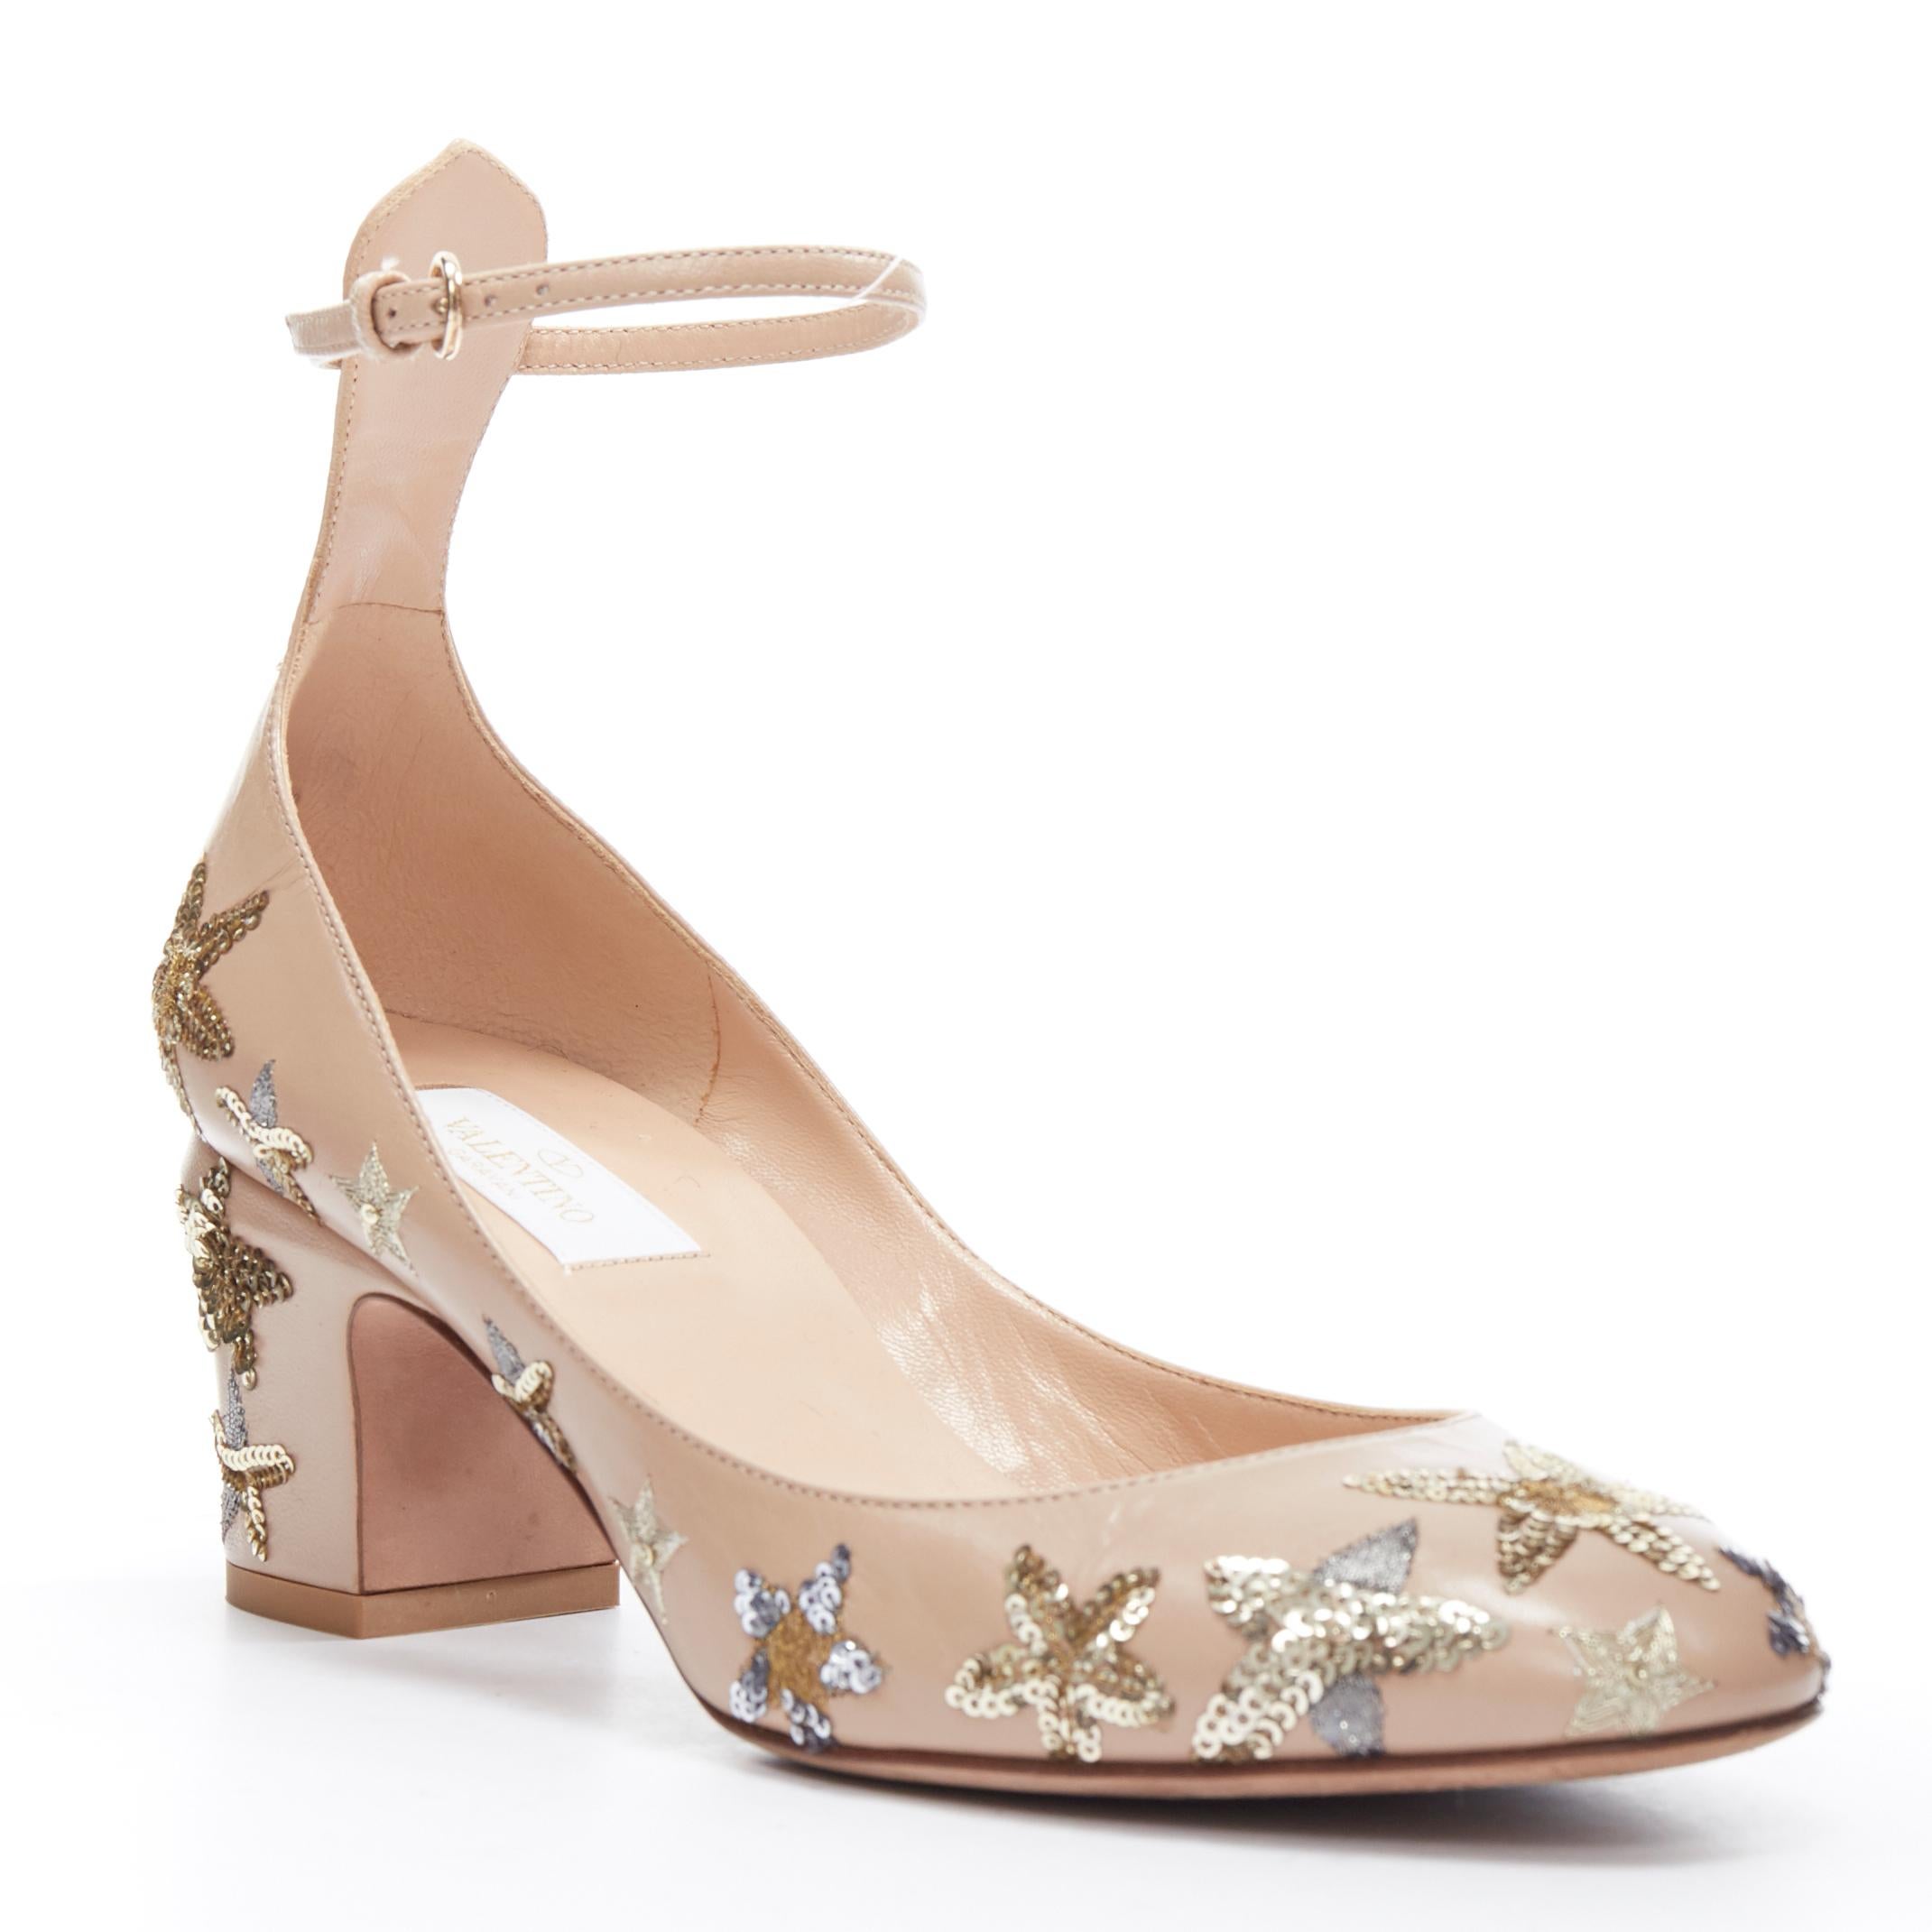 VALENTINO Tango nude gold star embroidered block heel ankle strap pump EU37.5 
Reference: LNKO/A01219 
Brand: Valentino 
Model: Tango 
Material: Leather 
Color: Beige 
Pattern: Solid 
Closure: Ankle Strap 
Extra Detail: Mid (22.9 in) heel height.